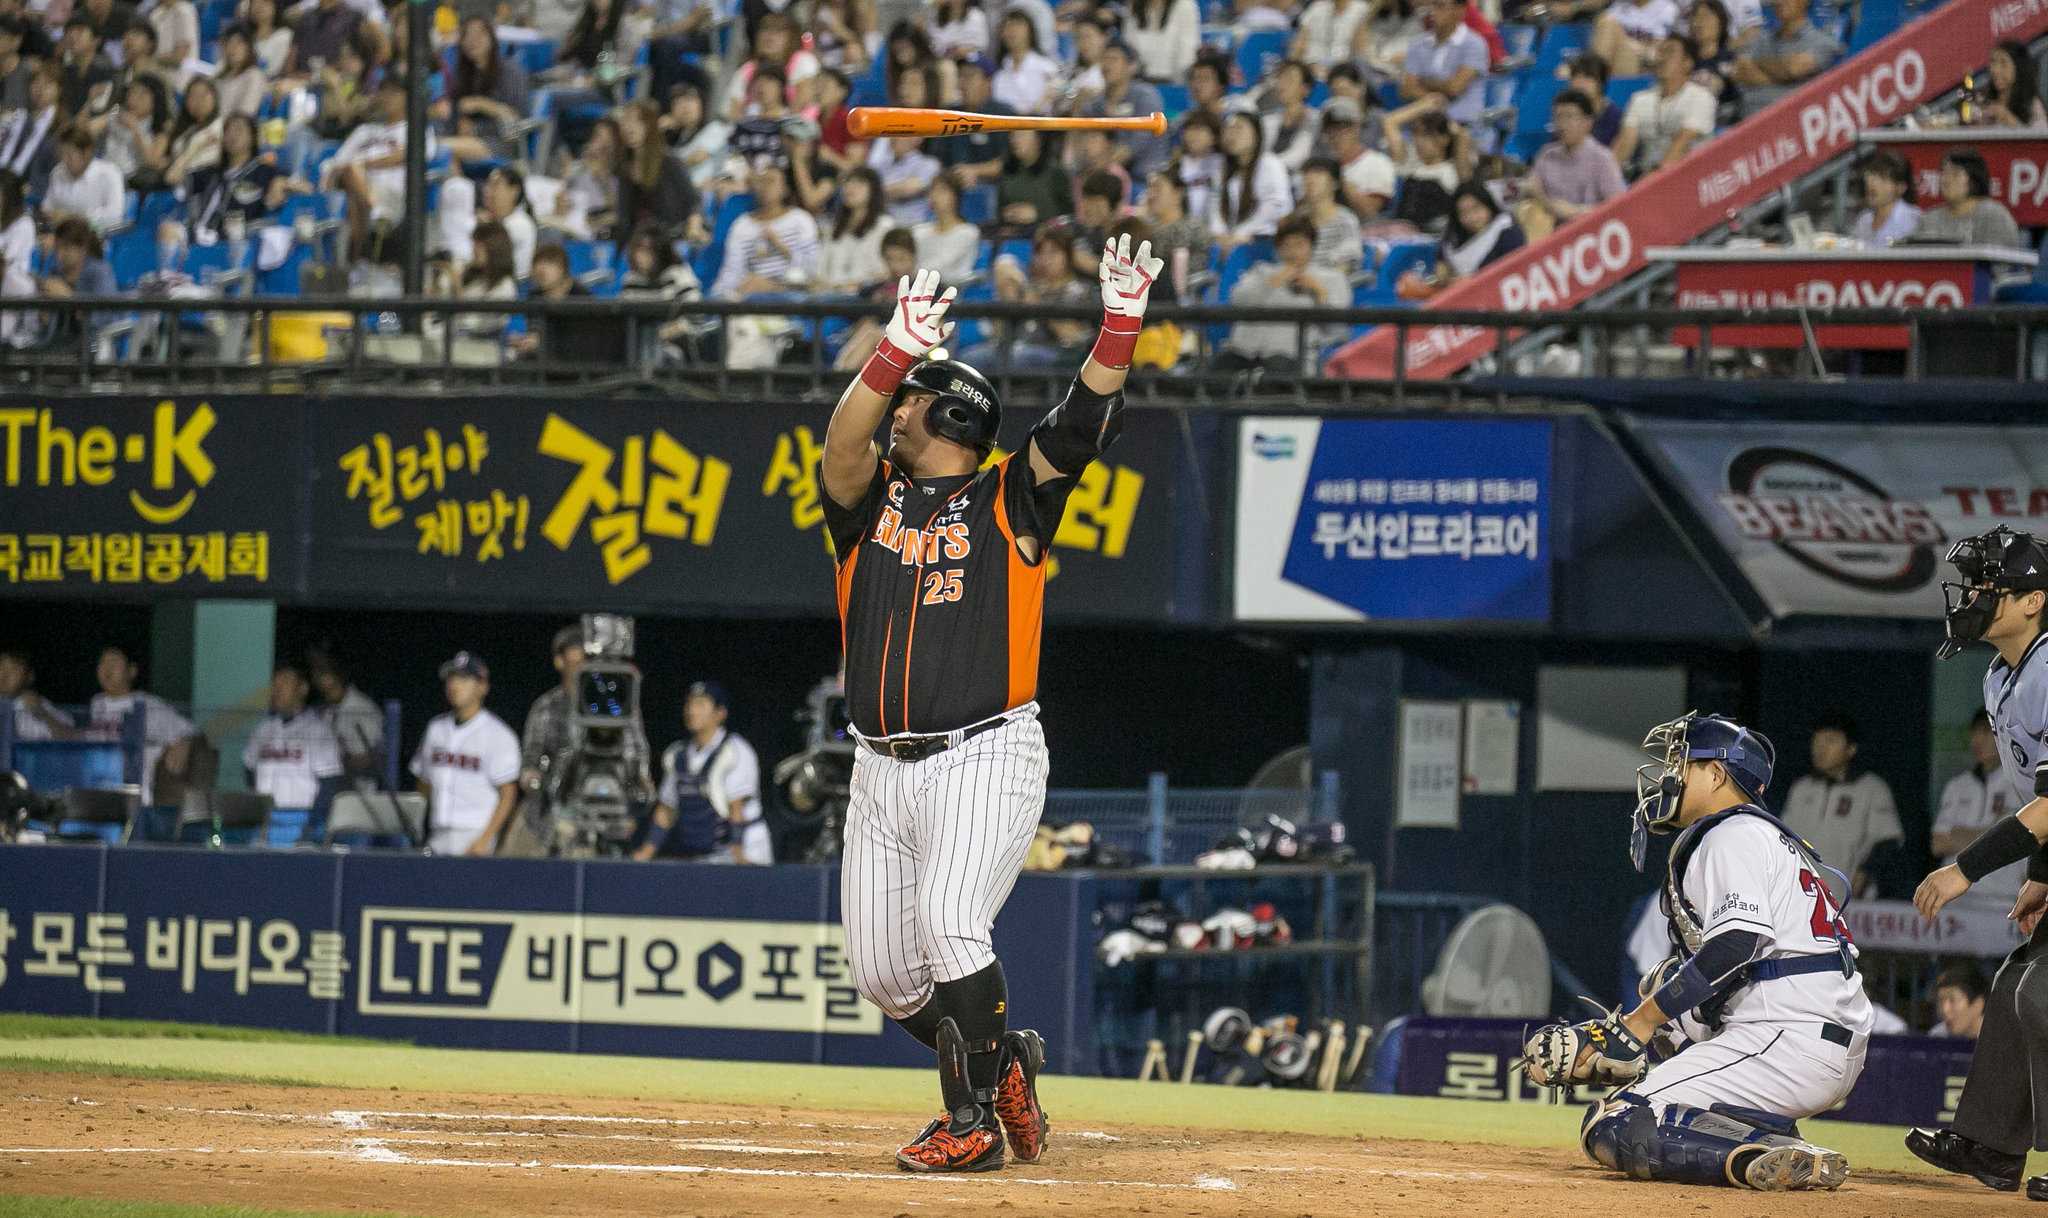  Are You Ready for Some Korean Baseball?